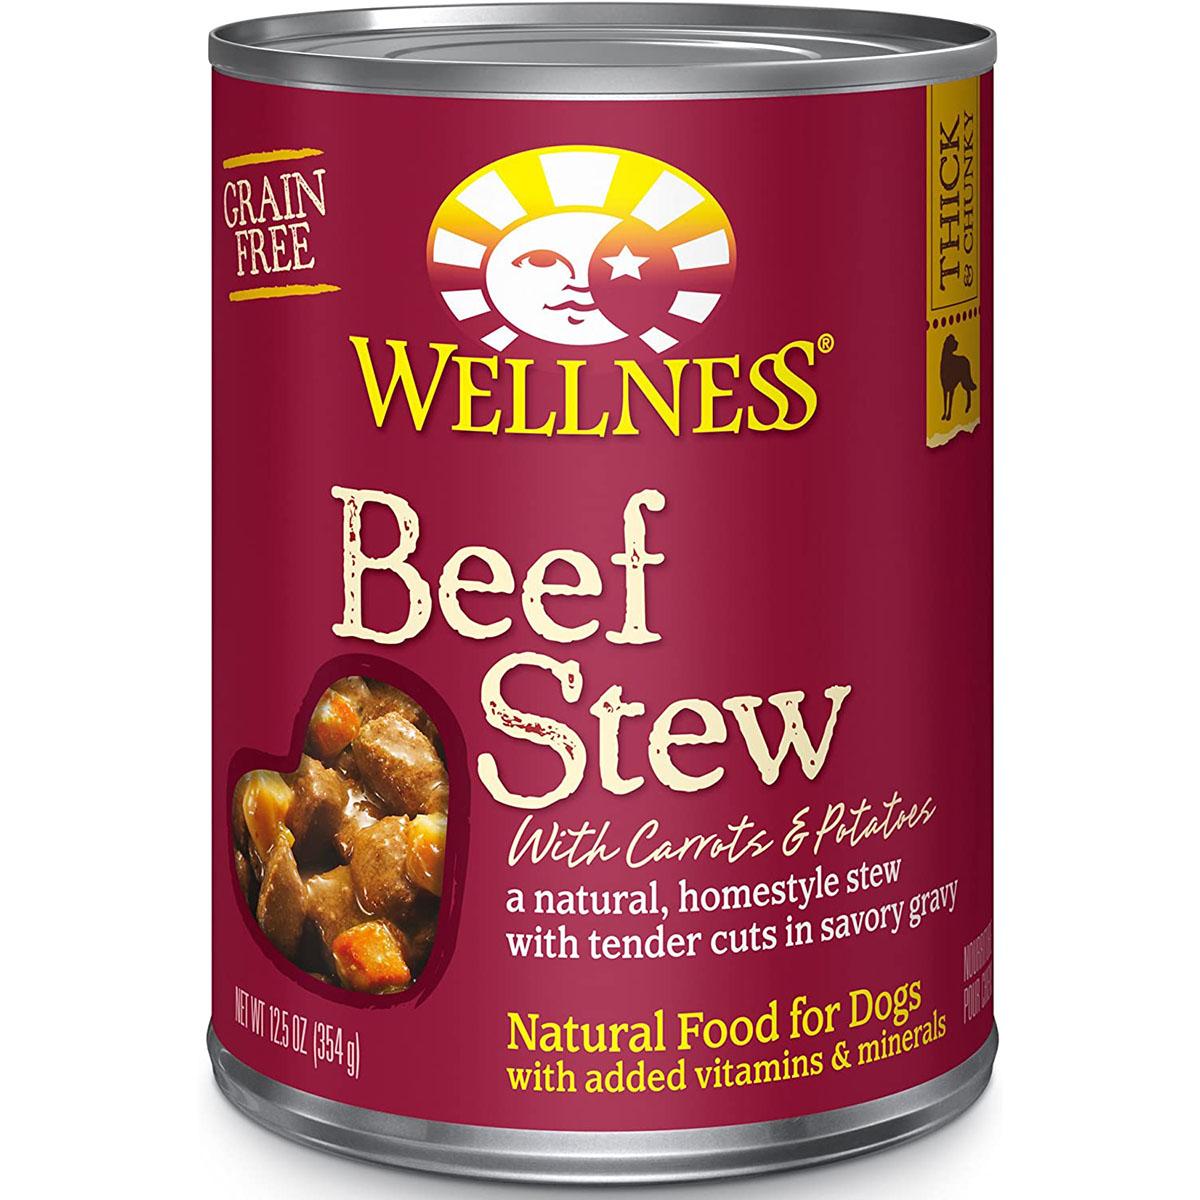 Wellness Beef Stew with Carrots & Potatoes Grain-Free Canned Dog Food